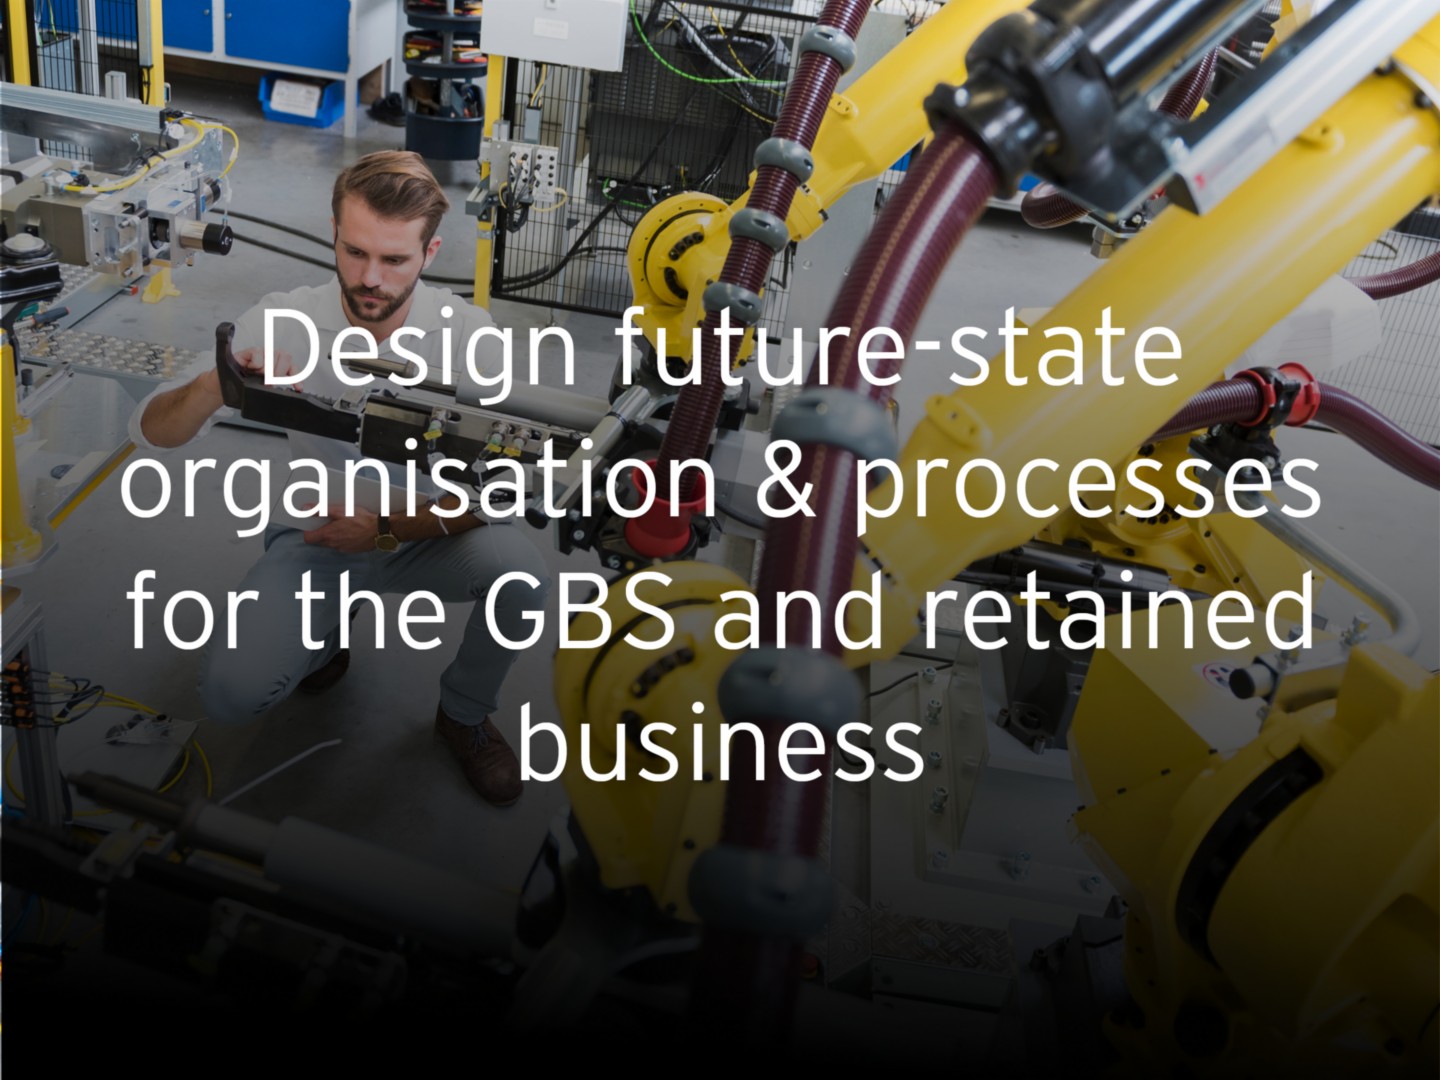 Design future-state organisation & processes for the GBS and retained business